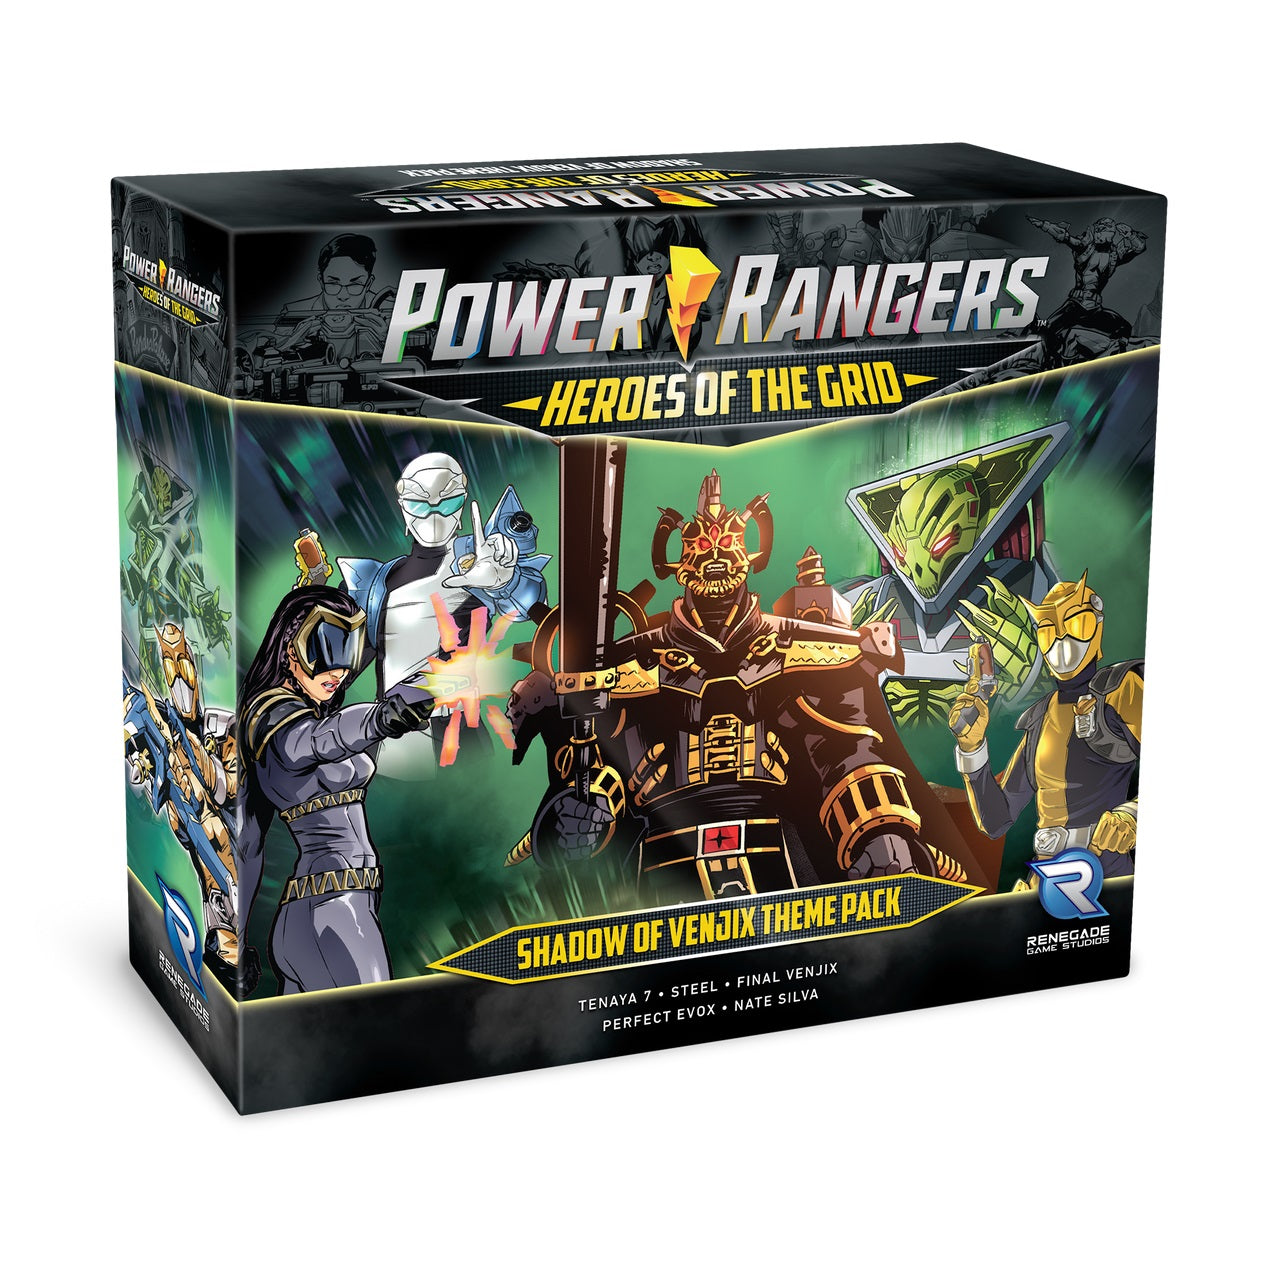 Power Rangers Heroes of the Grid: Shadow of Venjix Theme Pack